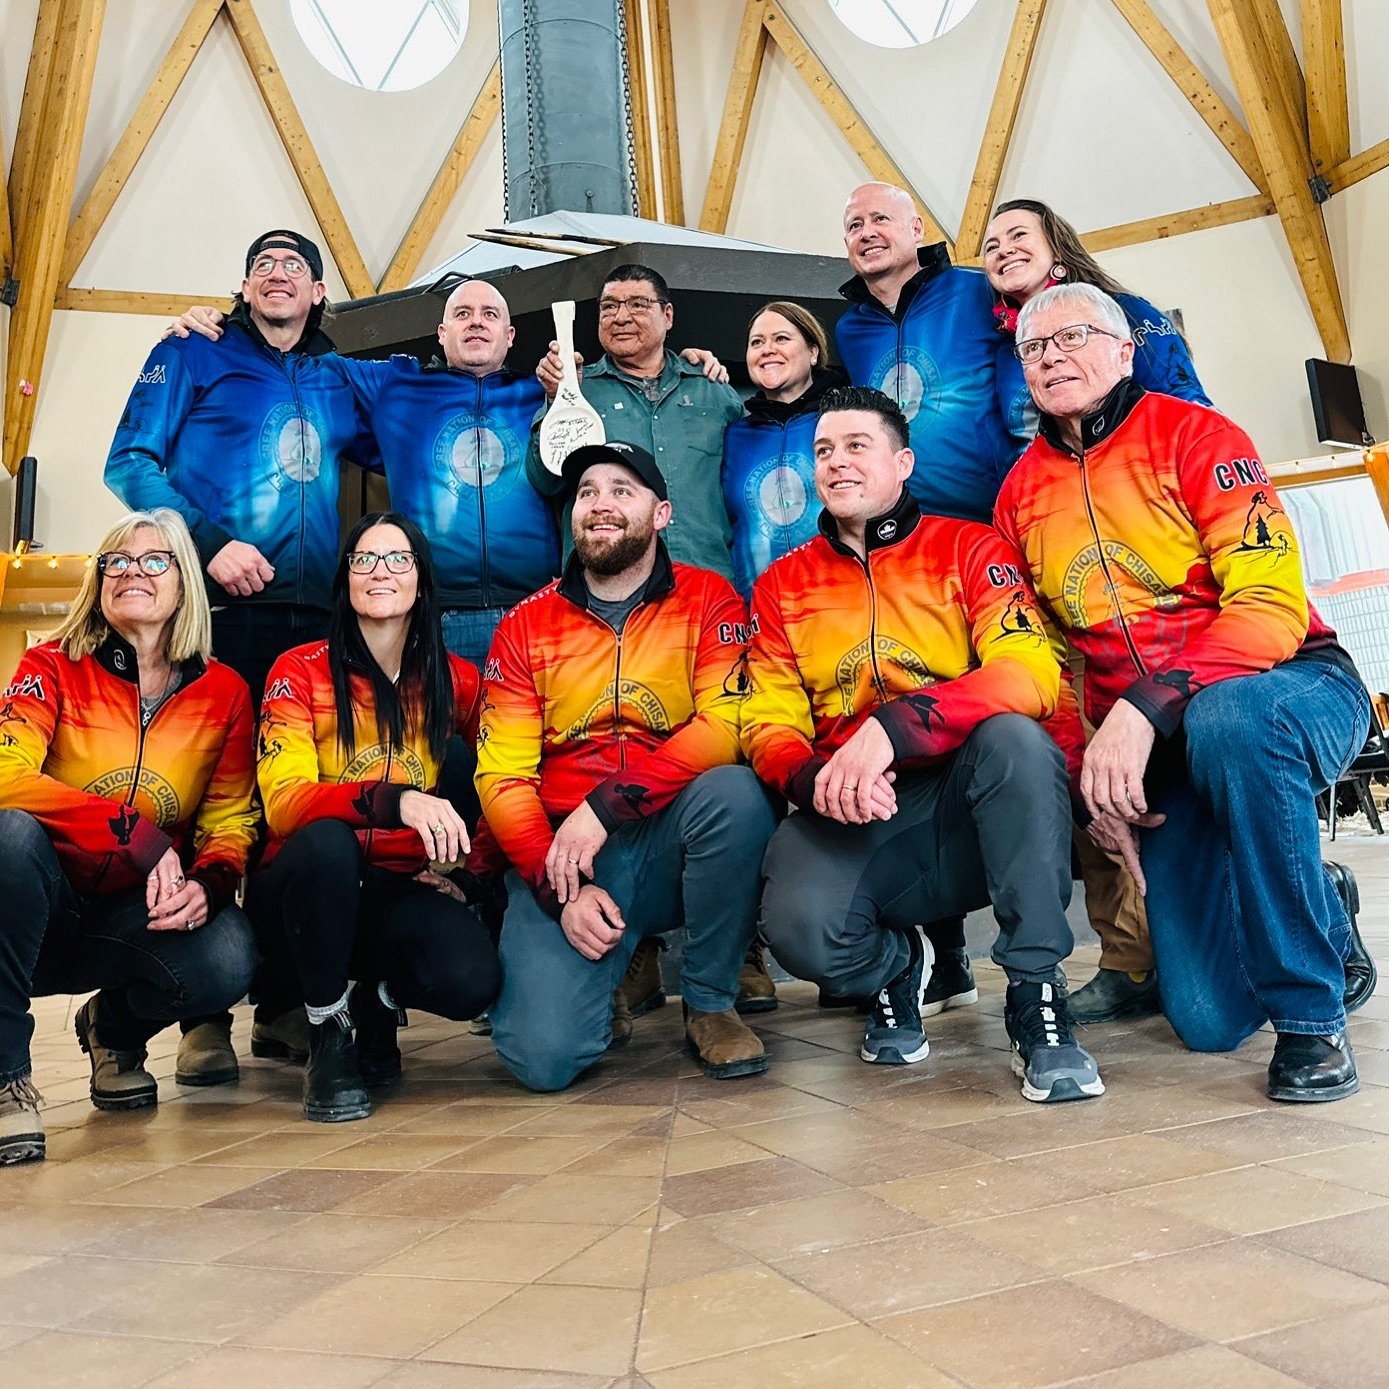 We&rsquo;re so excited to cheer Kerri on as she competes in the Chisasibi Curling Classic this weekend in the Cree Nation of Chisasibi, Quebec!

This event marks a historic moment where the first all-Indigenous curling game will be played. 🧡

These 